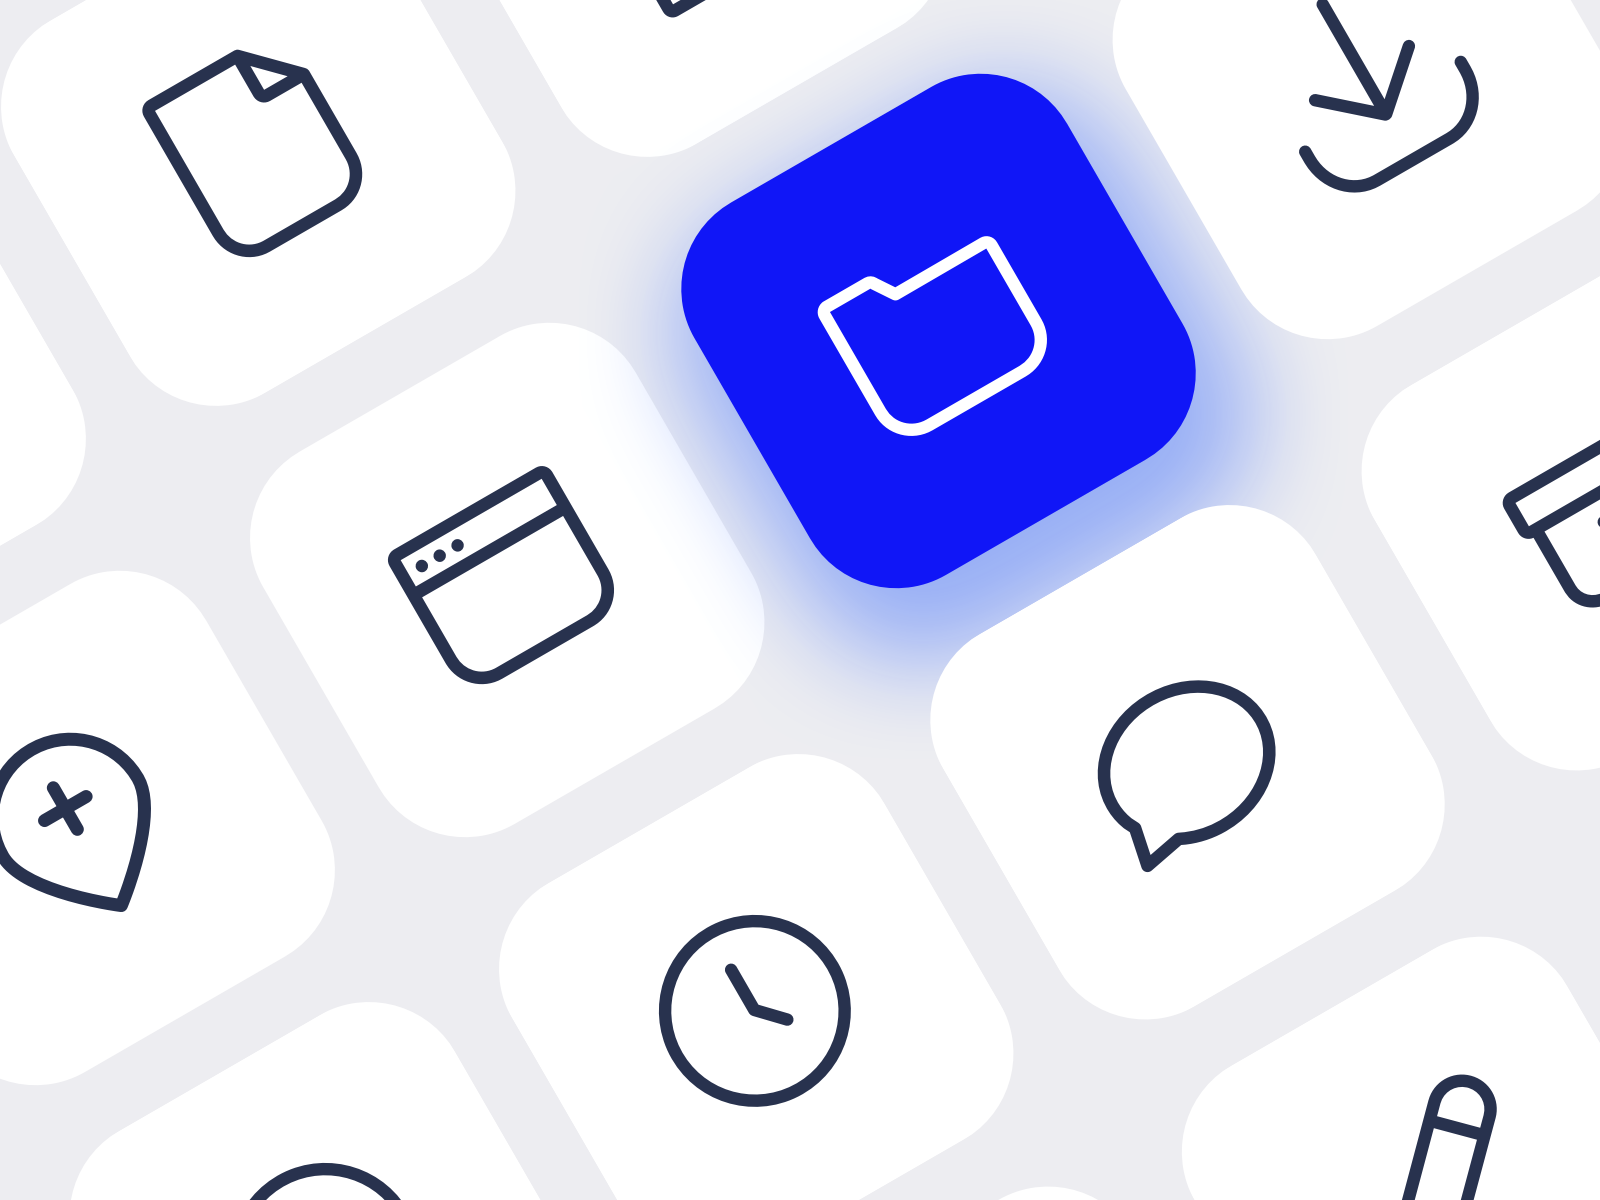 Premium icon pack by Xicons Studio by Carlotta Govi on Dribbble